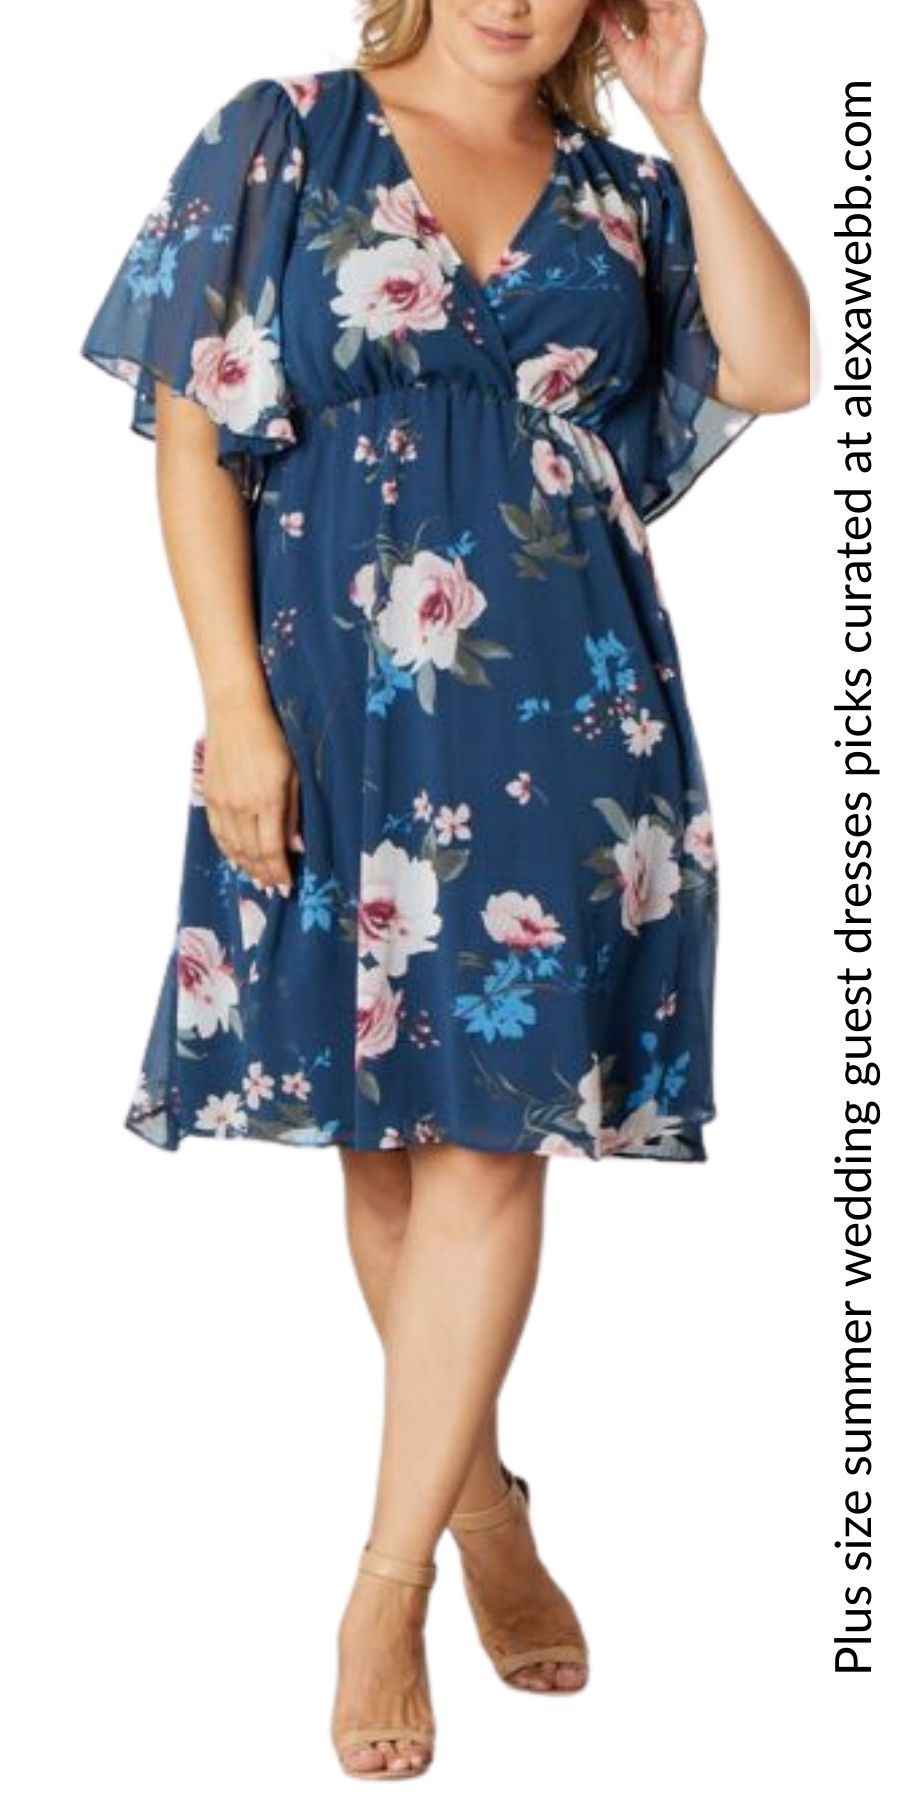 63 Plus Size Wedding Guest Dresses with Sleeves - Alexa Webb